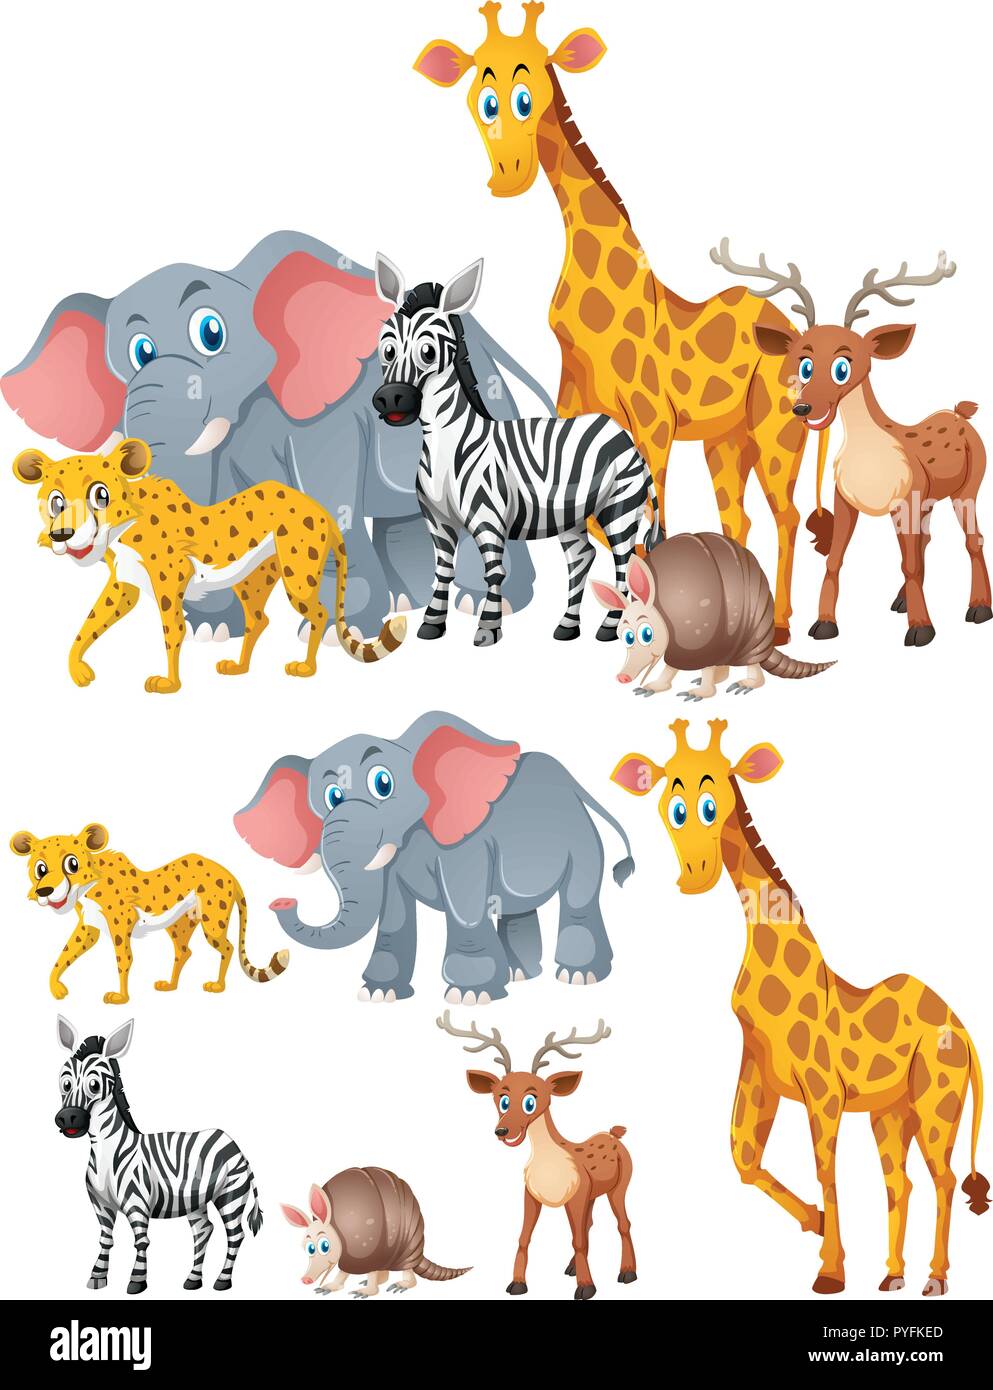 Different kinds of wild animals illustration Stock Vector